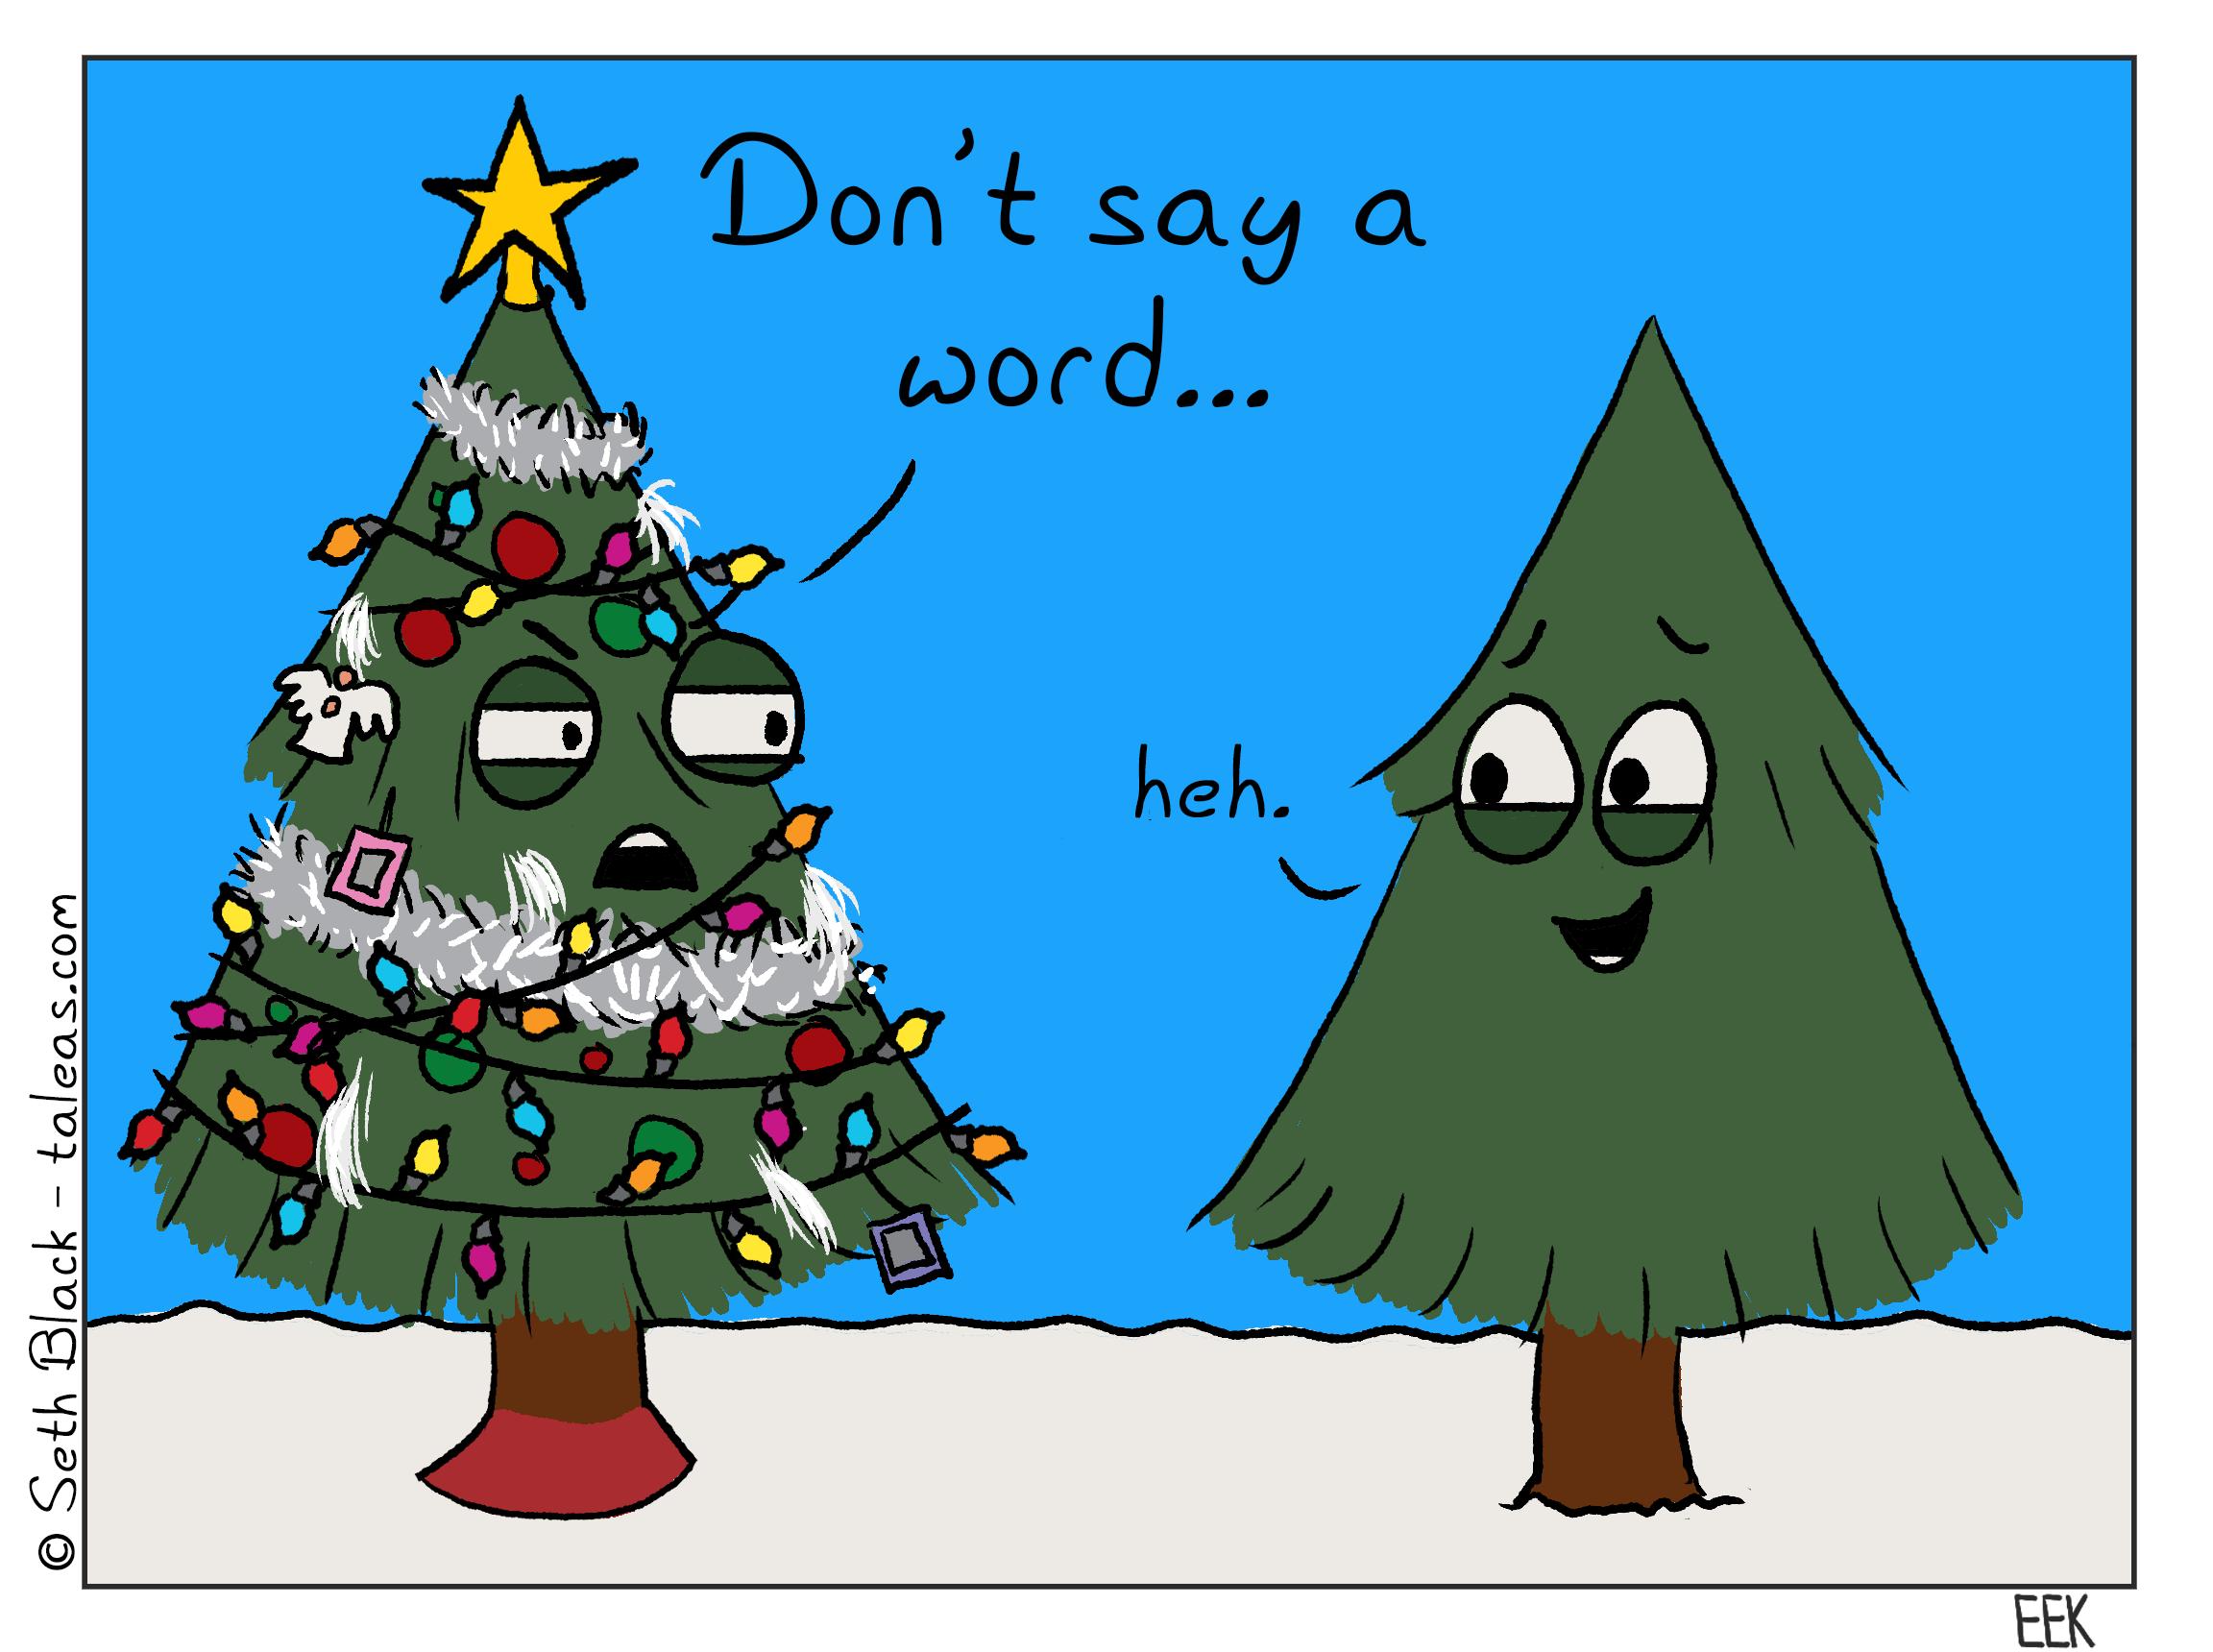 Two evergreen trees are standing in a snowy field. One is over decorated with Christmas ornaments, multi-colored lights, angels, fluff, ribbon, and tinsel. The tree demands, frustrated, "Don't say a word..." to which the other tree, obviously amused, giggles, "heh".